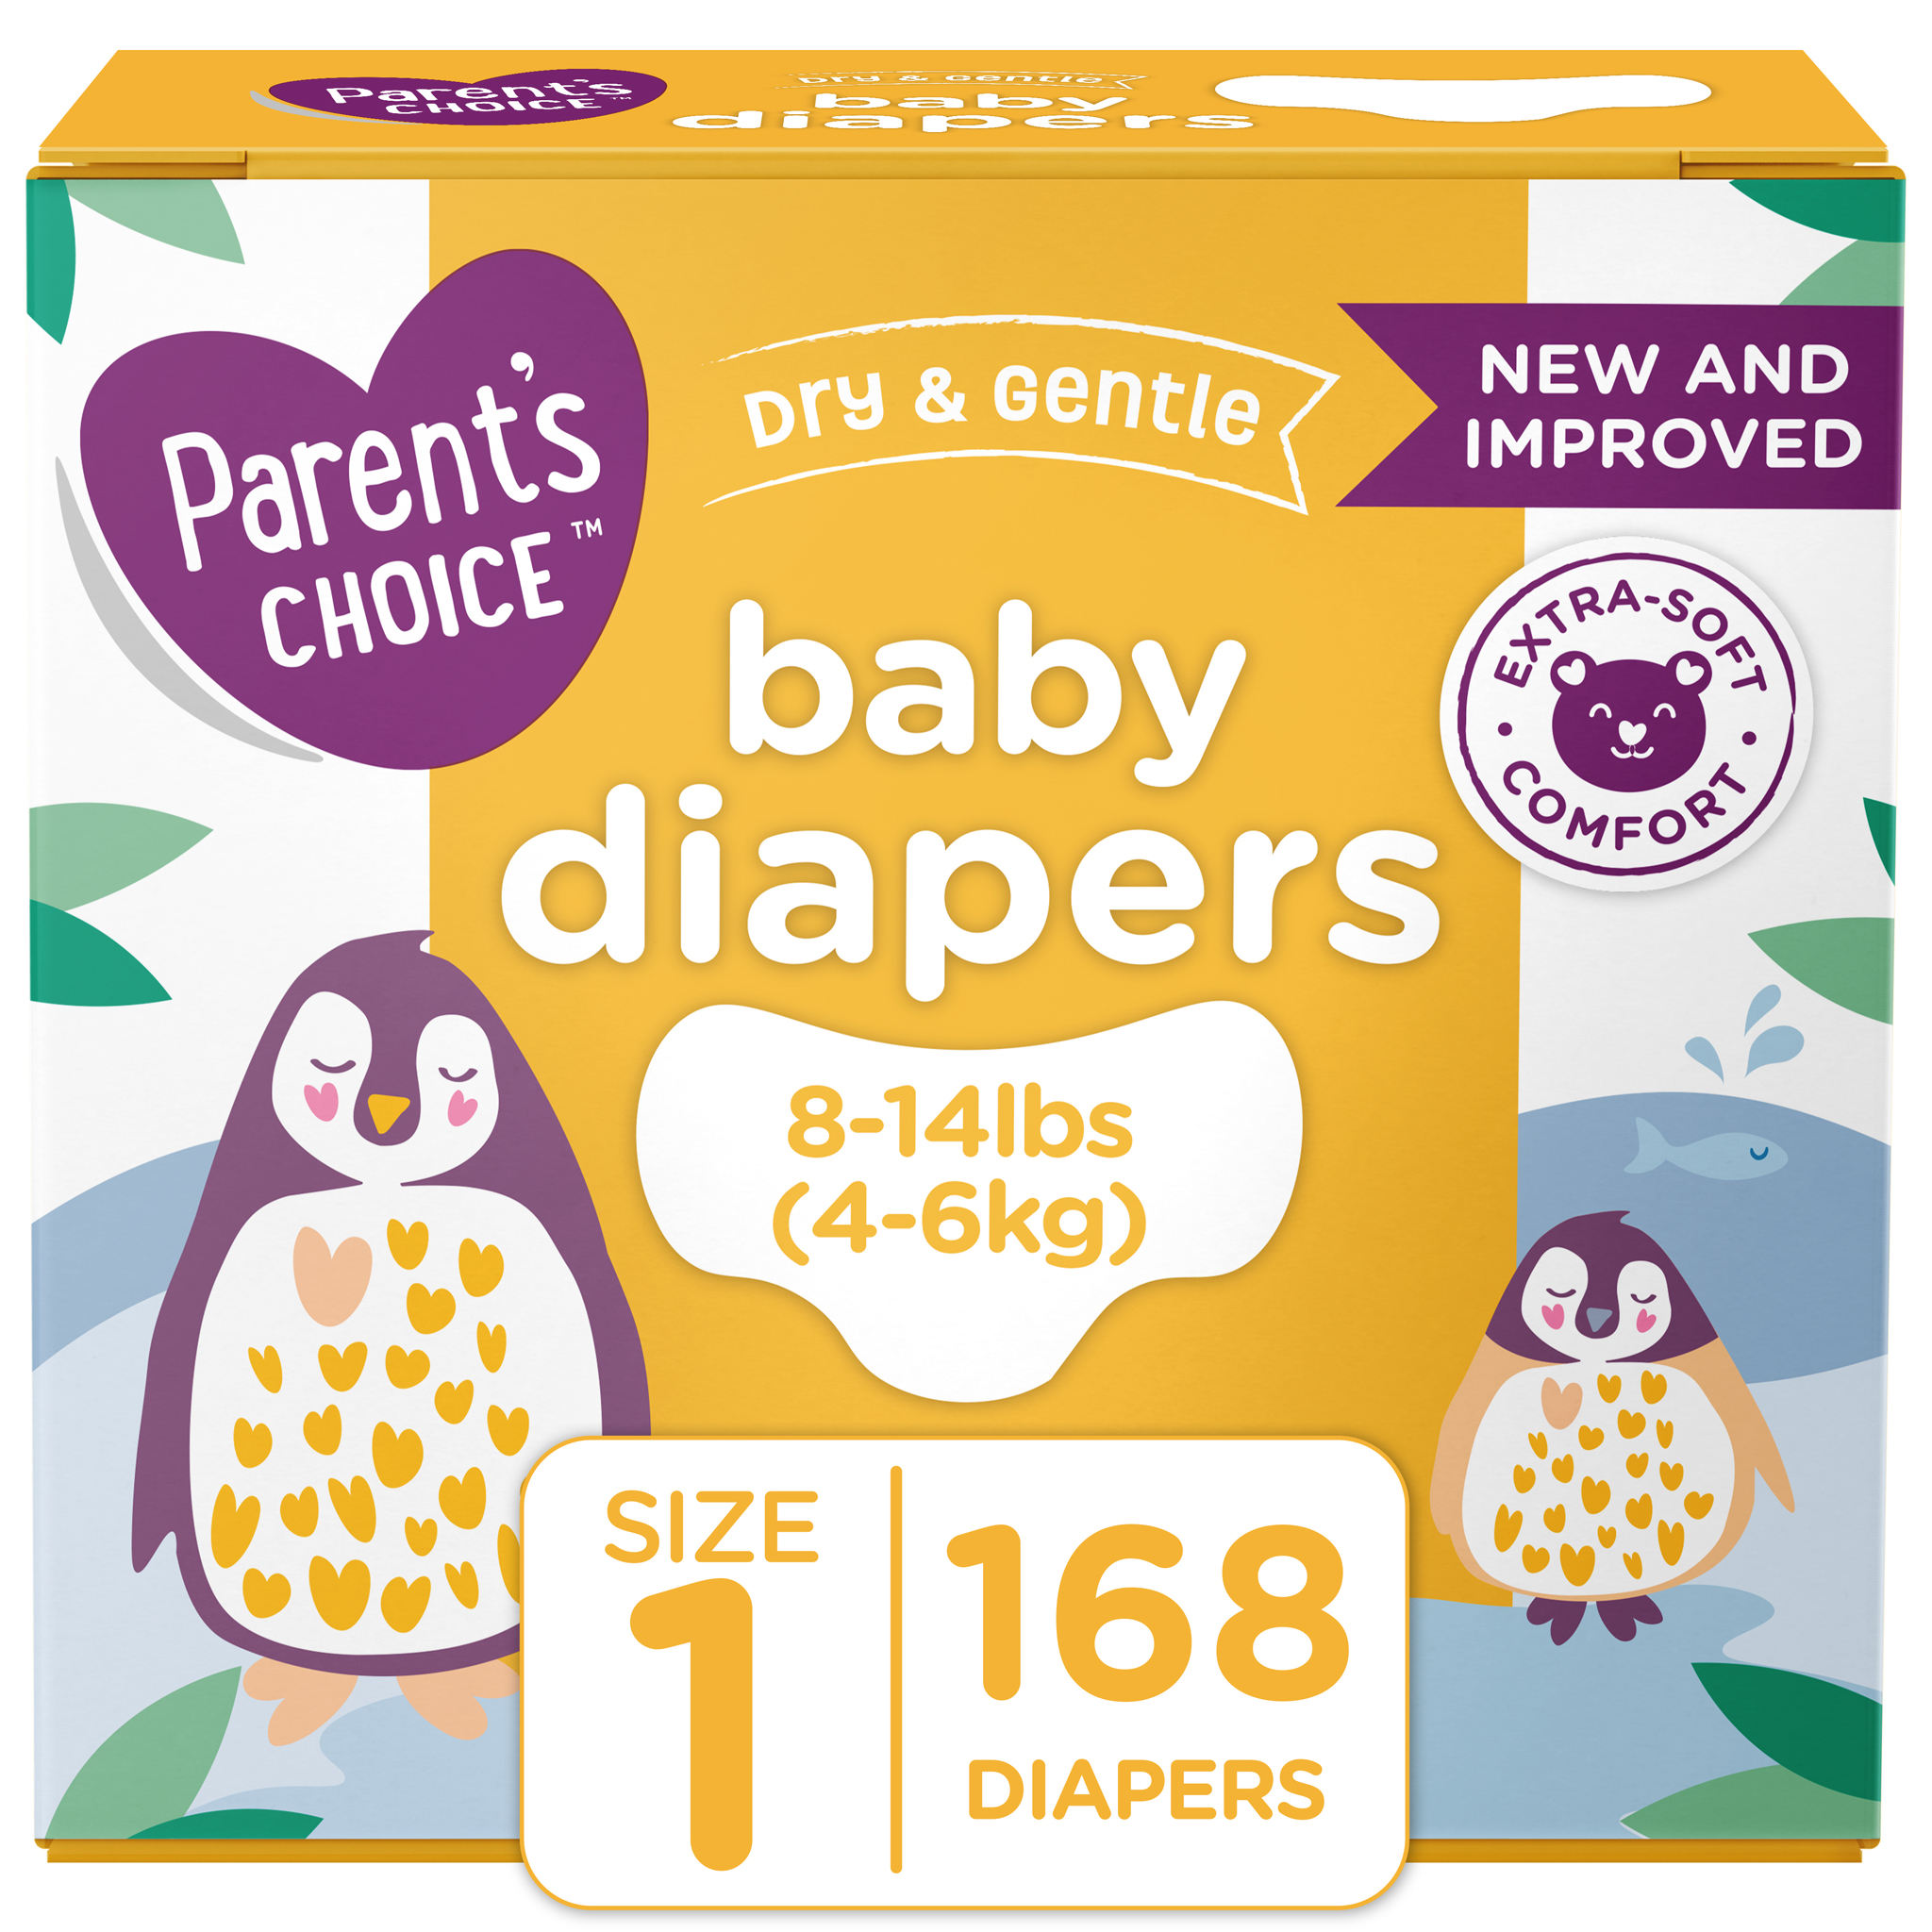 Parent's Choice Baby Diapers, 1 168Ct - image 1 of 12